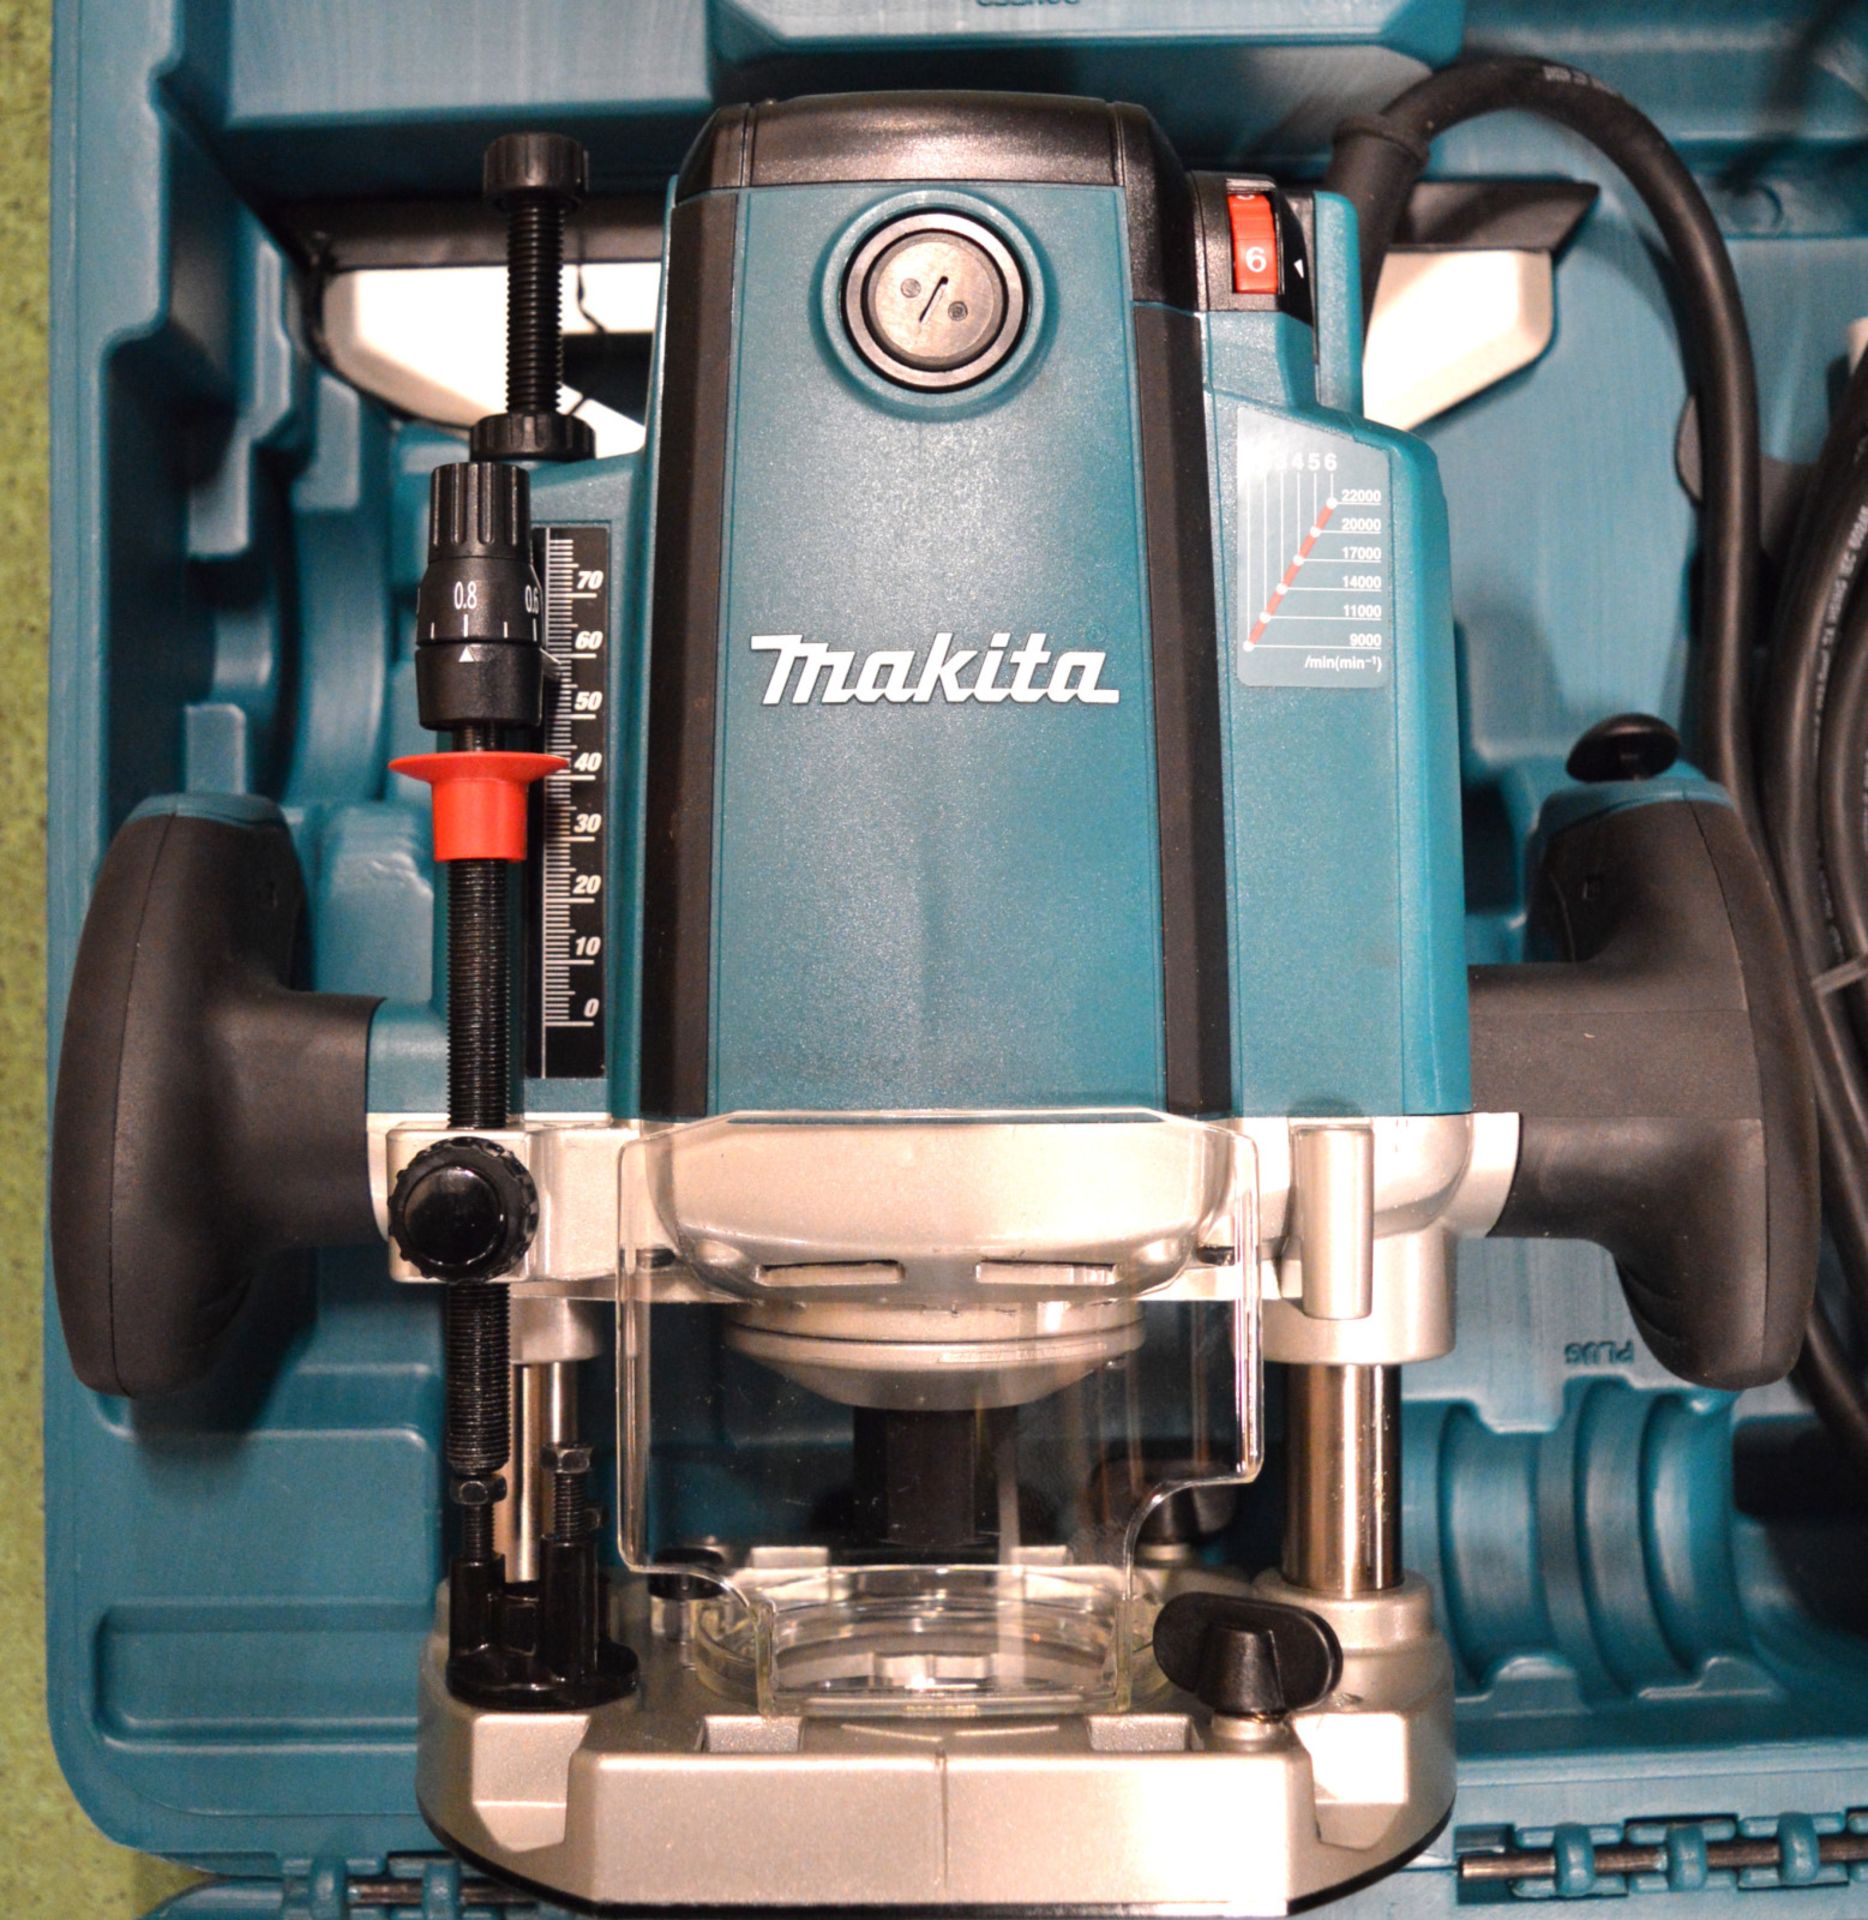 Makita Router RP2301FC 2100W 110V - Brand new in box. - Image 2 of 2